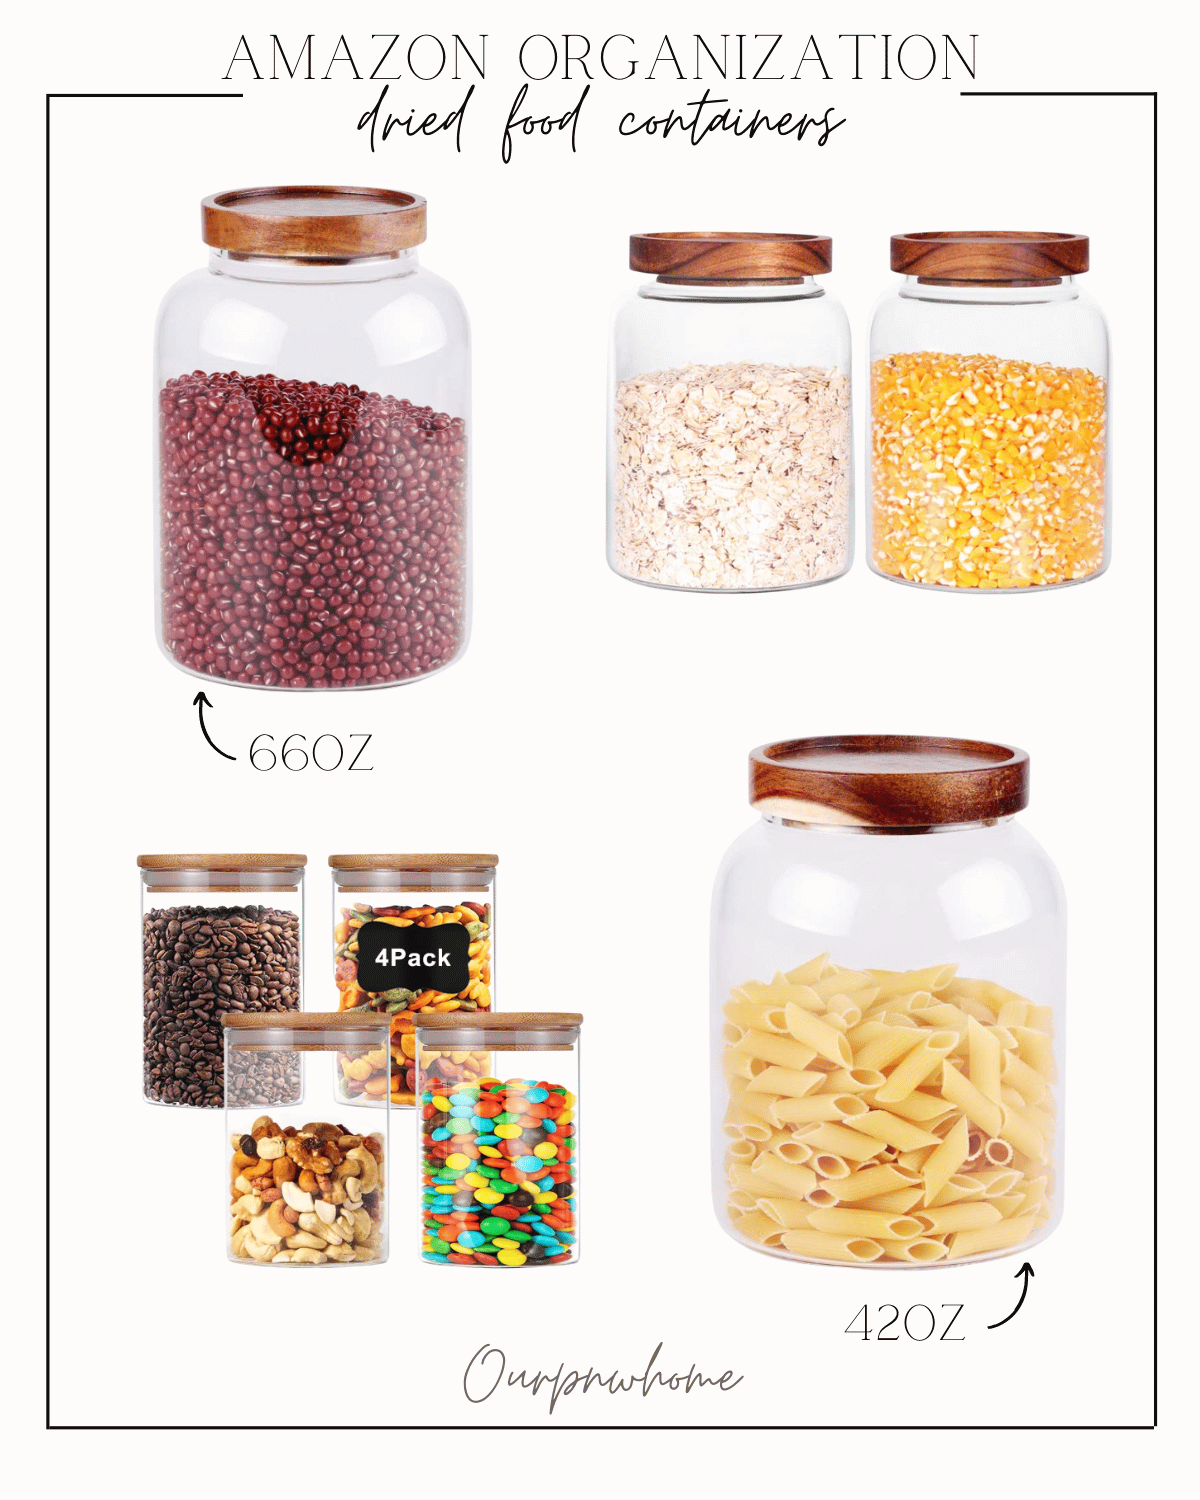 dry food containers, glass jars, organizers, amazon kitchen organization, glass jar containers, storage